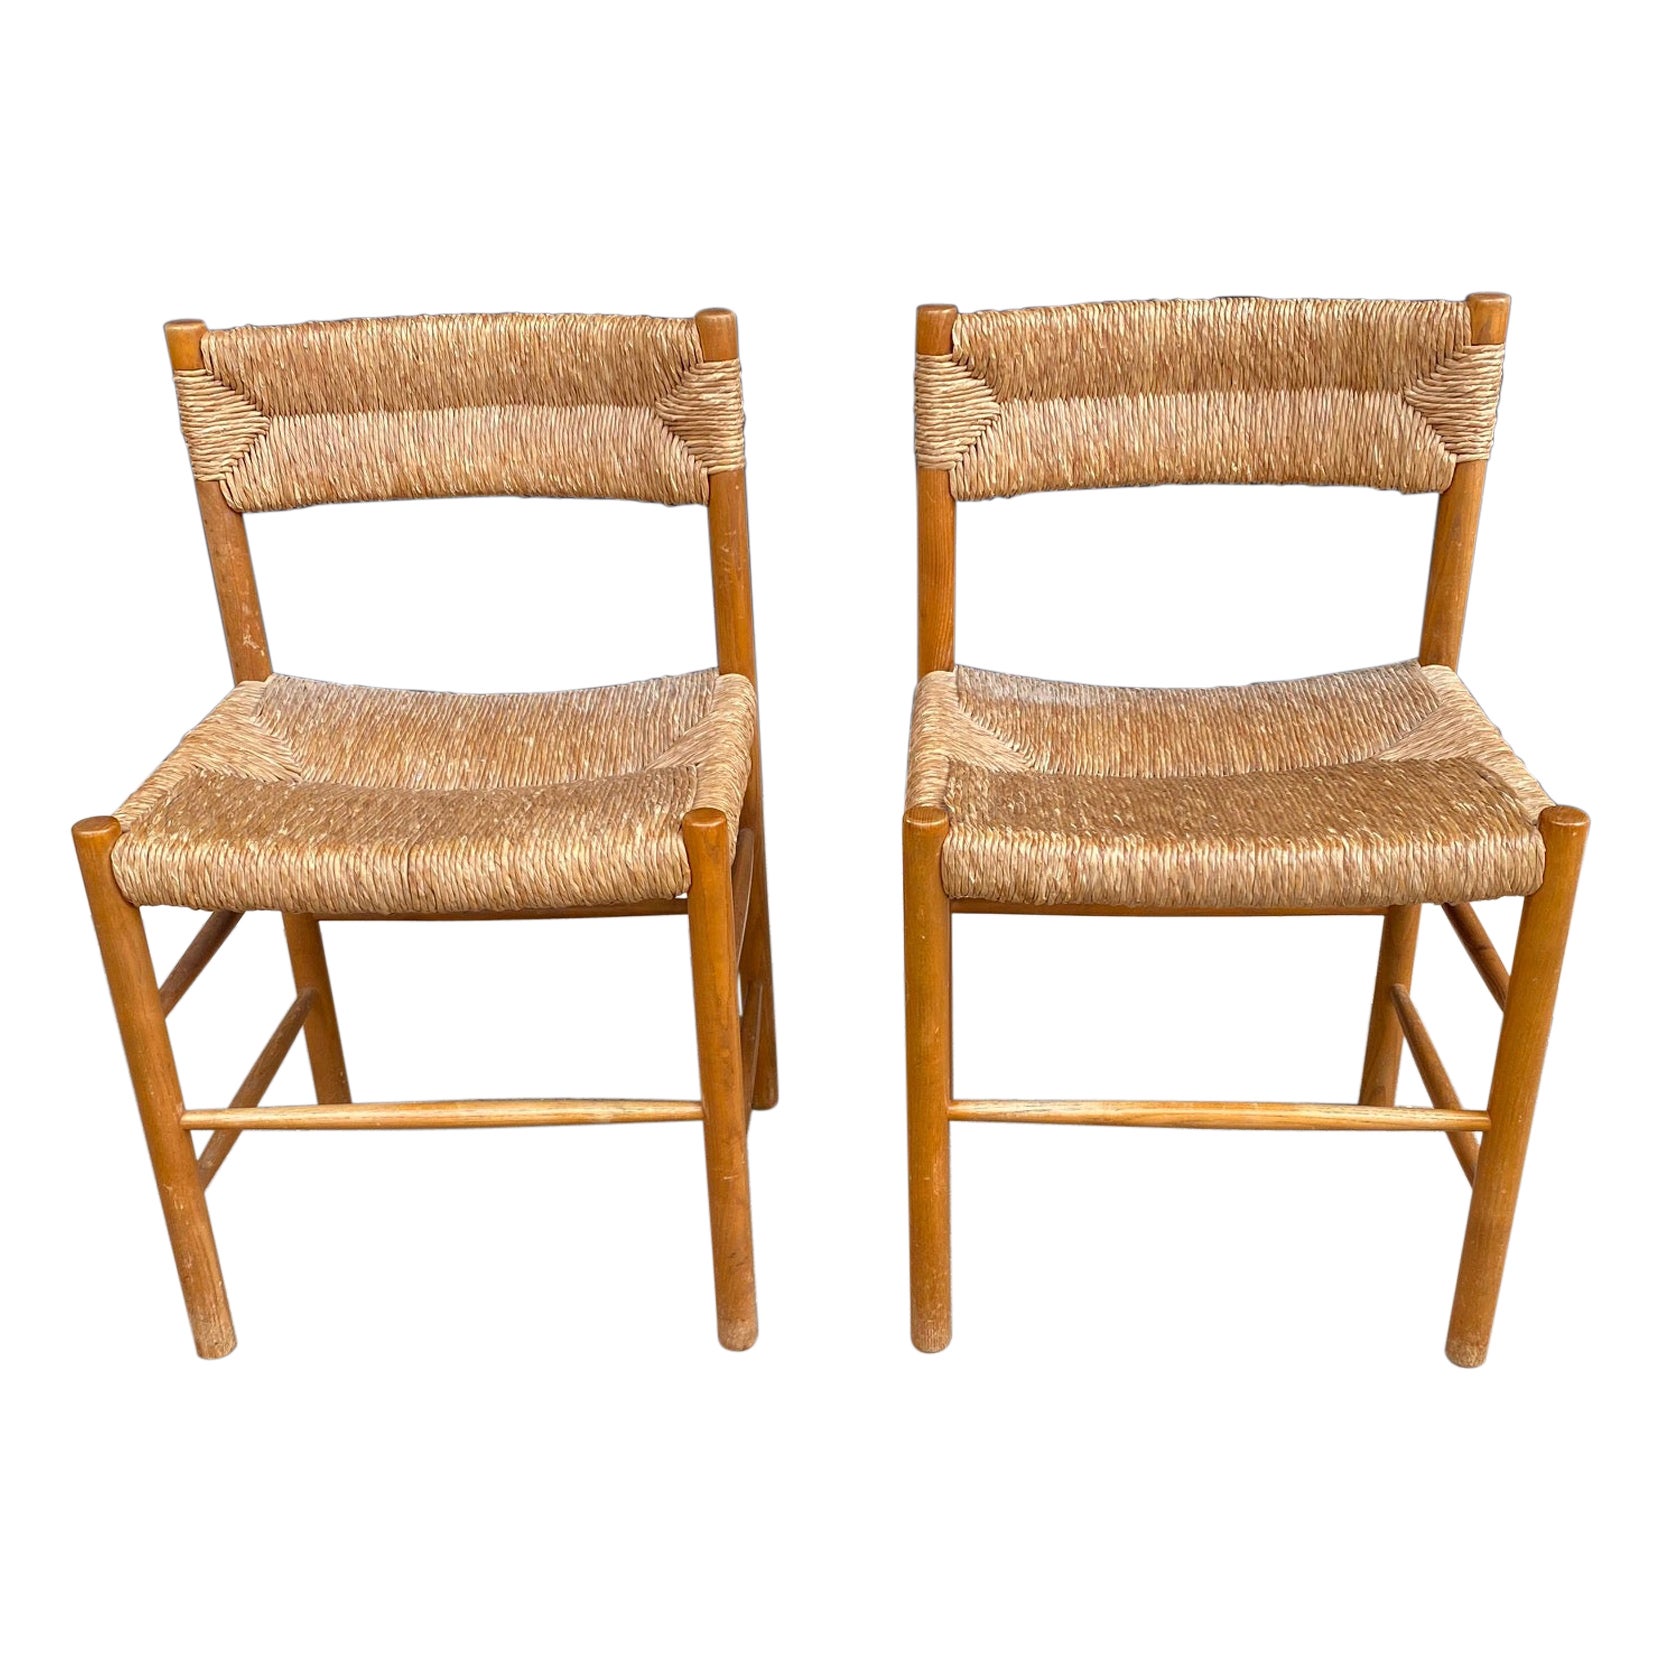 Pair of "Dordogne" Charlotte Perriand Chairs